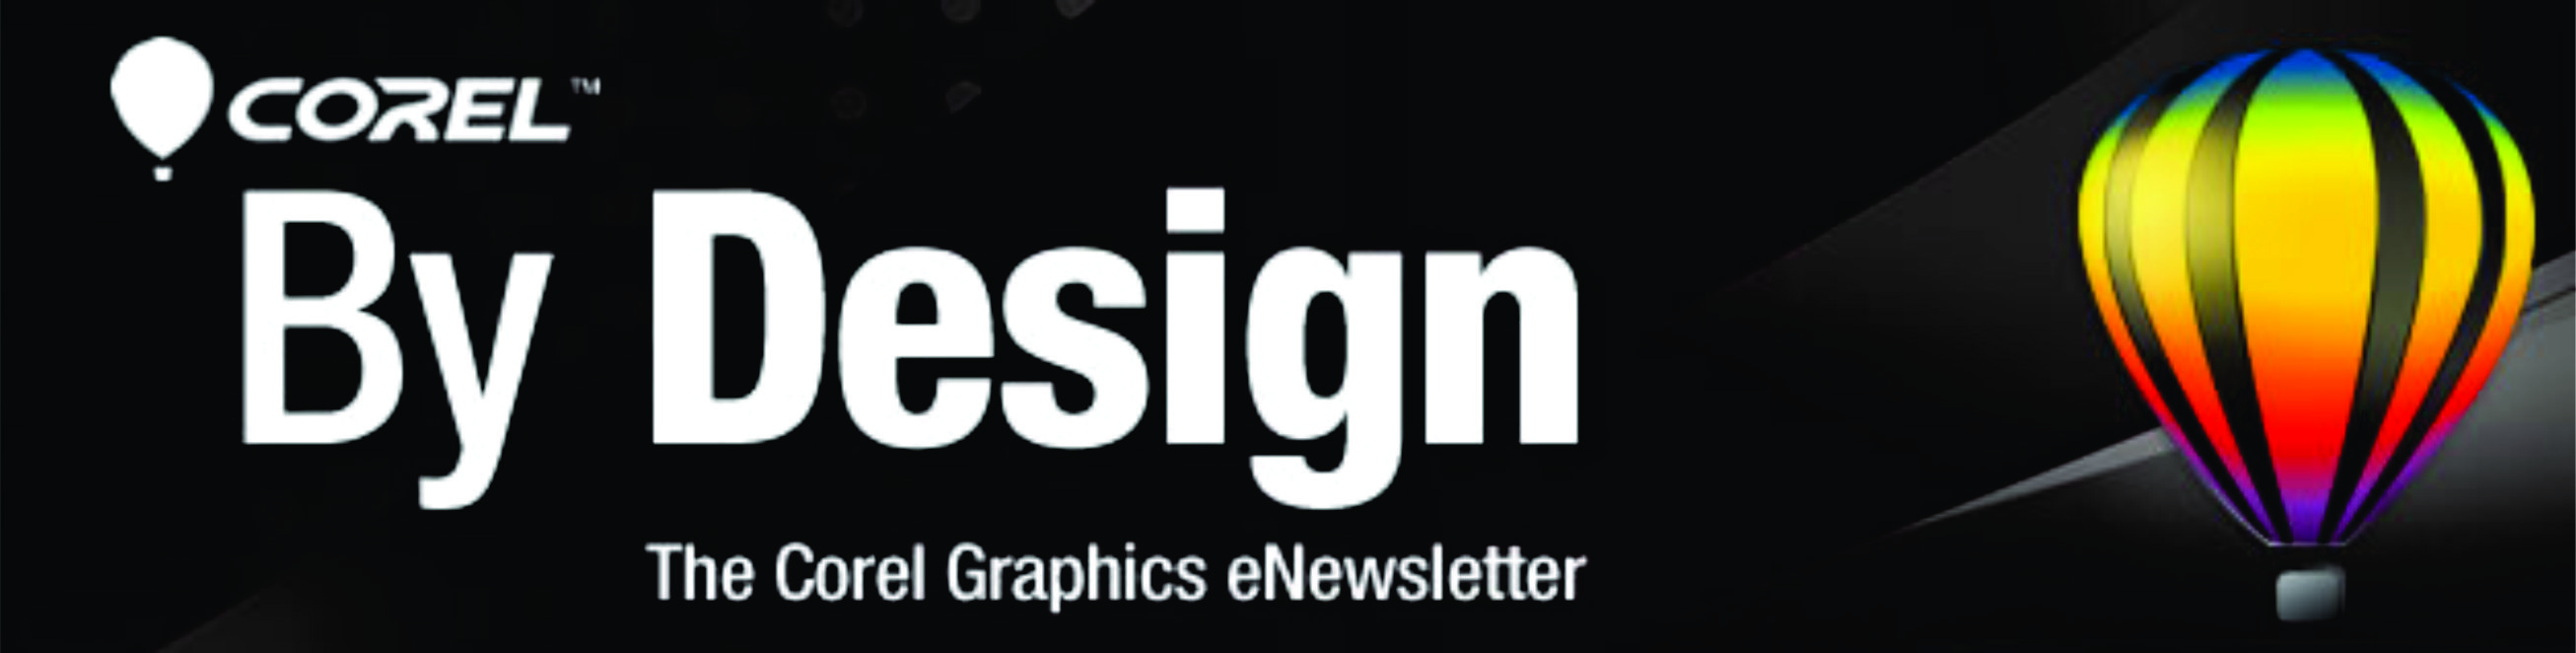 by-design-newsletter-january-2014-edition-is-now-available-coreldraw-tips-tricks-tutorials